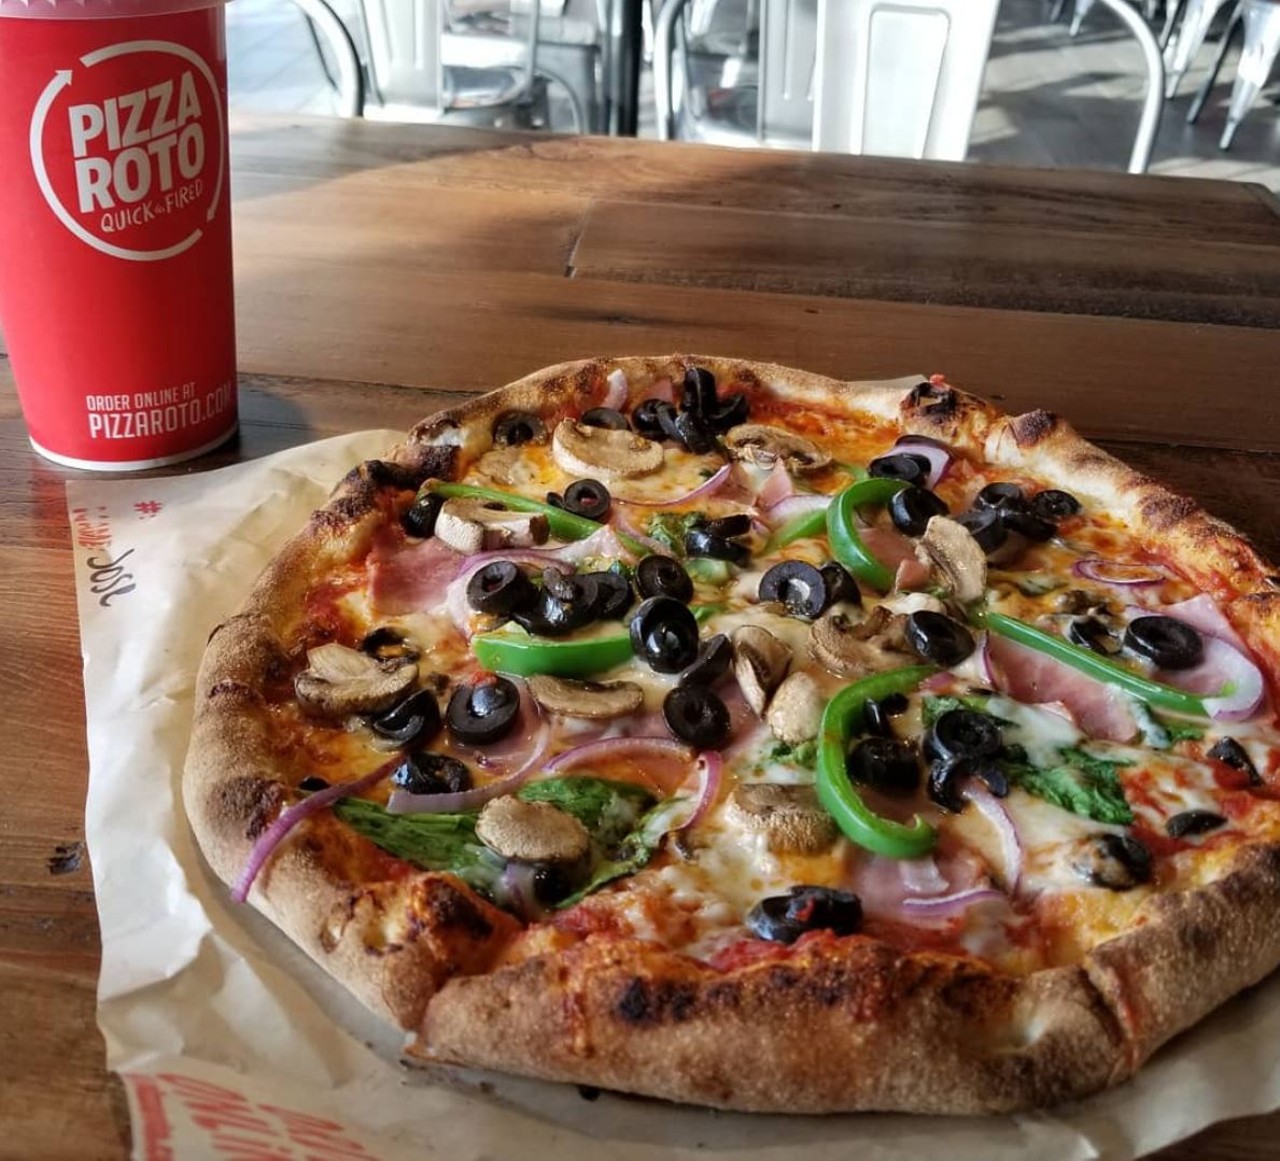 Pizza Roto
9702 Huebner Rd, (210) 361-7686, pizzaroto.com
Pizza Roto, a fast-casual pizza joint, opened its first San Antonio franchise location. It features build-your-own pies, wine-based margaritas, draft beers and salads.
Photo via Instagram / merce_sadies